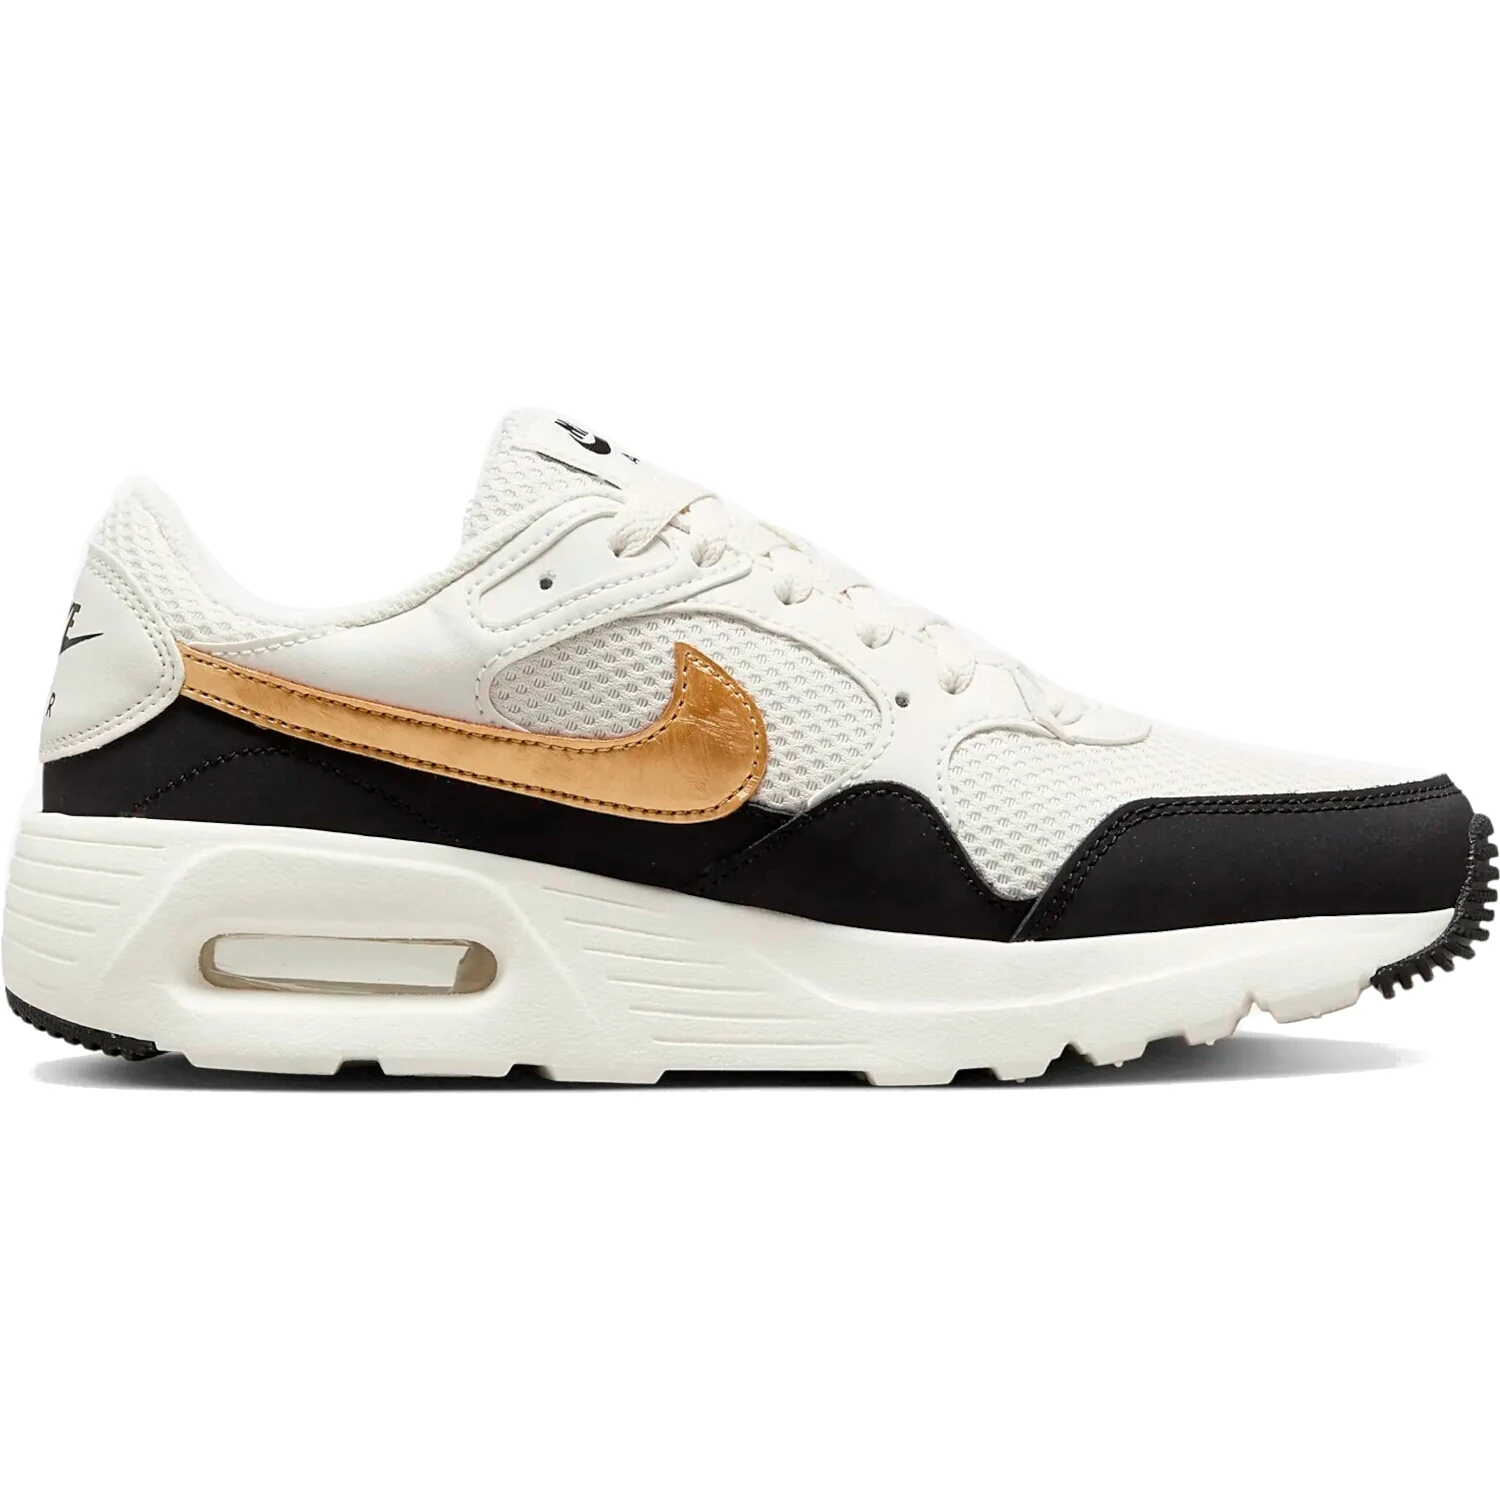 Accor Riet voering NIKE AIR MAX SC SPECIAL EDITION DAMES SNEAKERS DV6842-001 - wbsport.nl